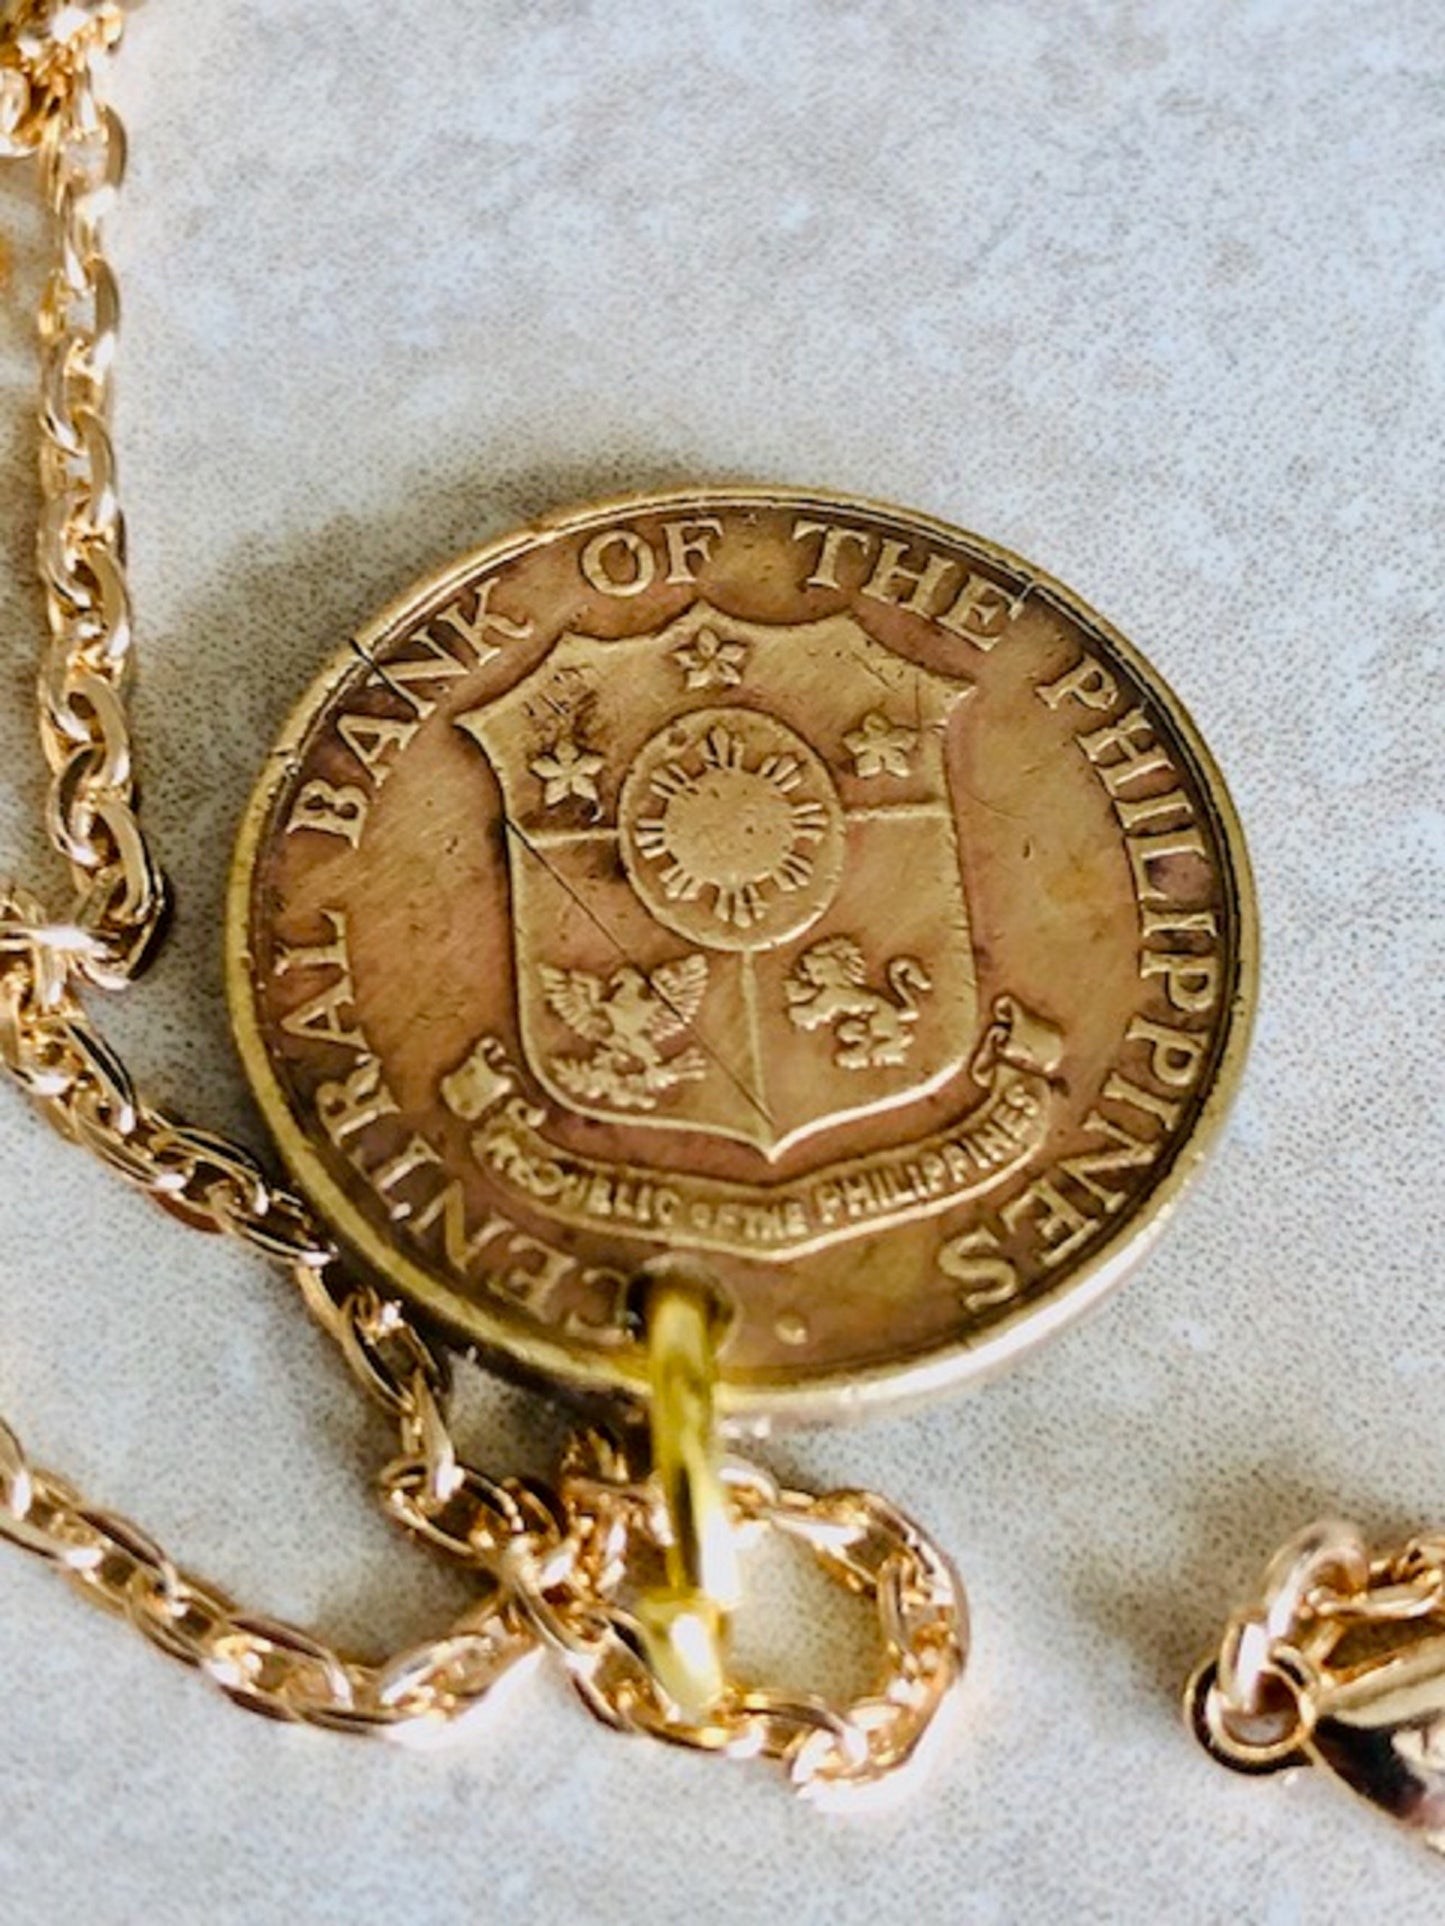 Philippines Coin Necklace Pendant Pilipinas 5 Centavos Personal Vintage Handmade Jewelry Gift Friend Charm For Him Her World Coin Collector